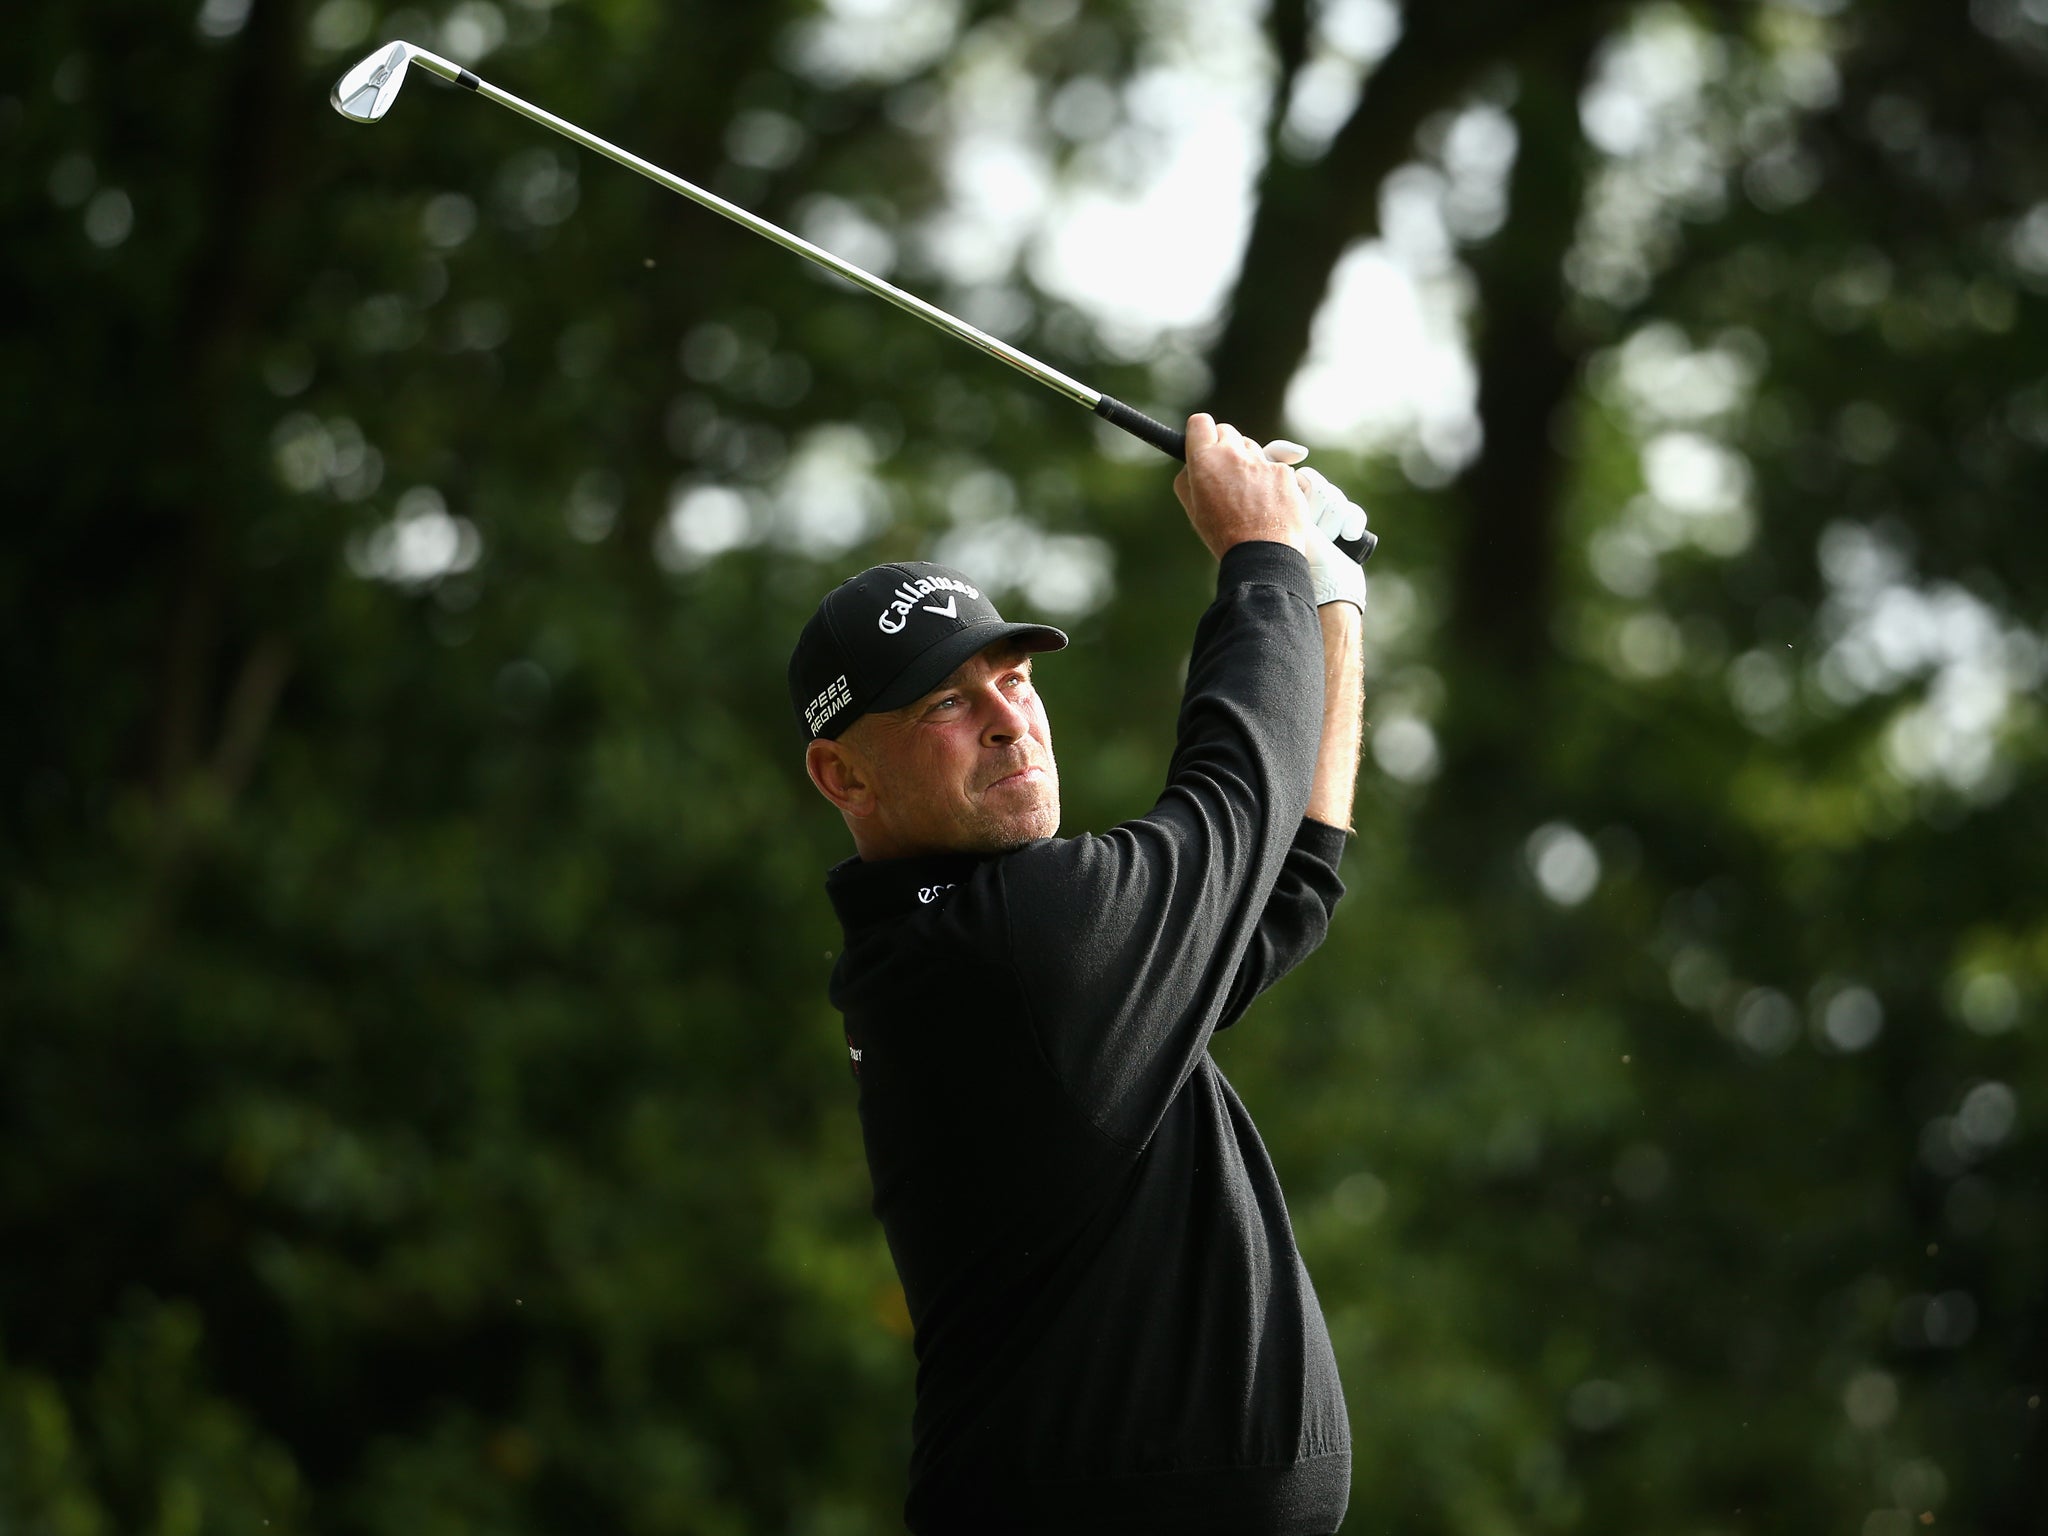 Thomas Bjorn of Denmark tees off on the 2nd hole during day one of the BMW PGA Championship at Wentworth on May 22 as he sets the early pace going eight-under through 14